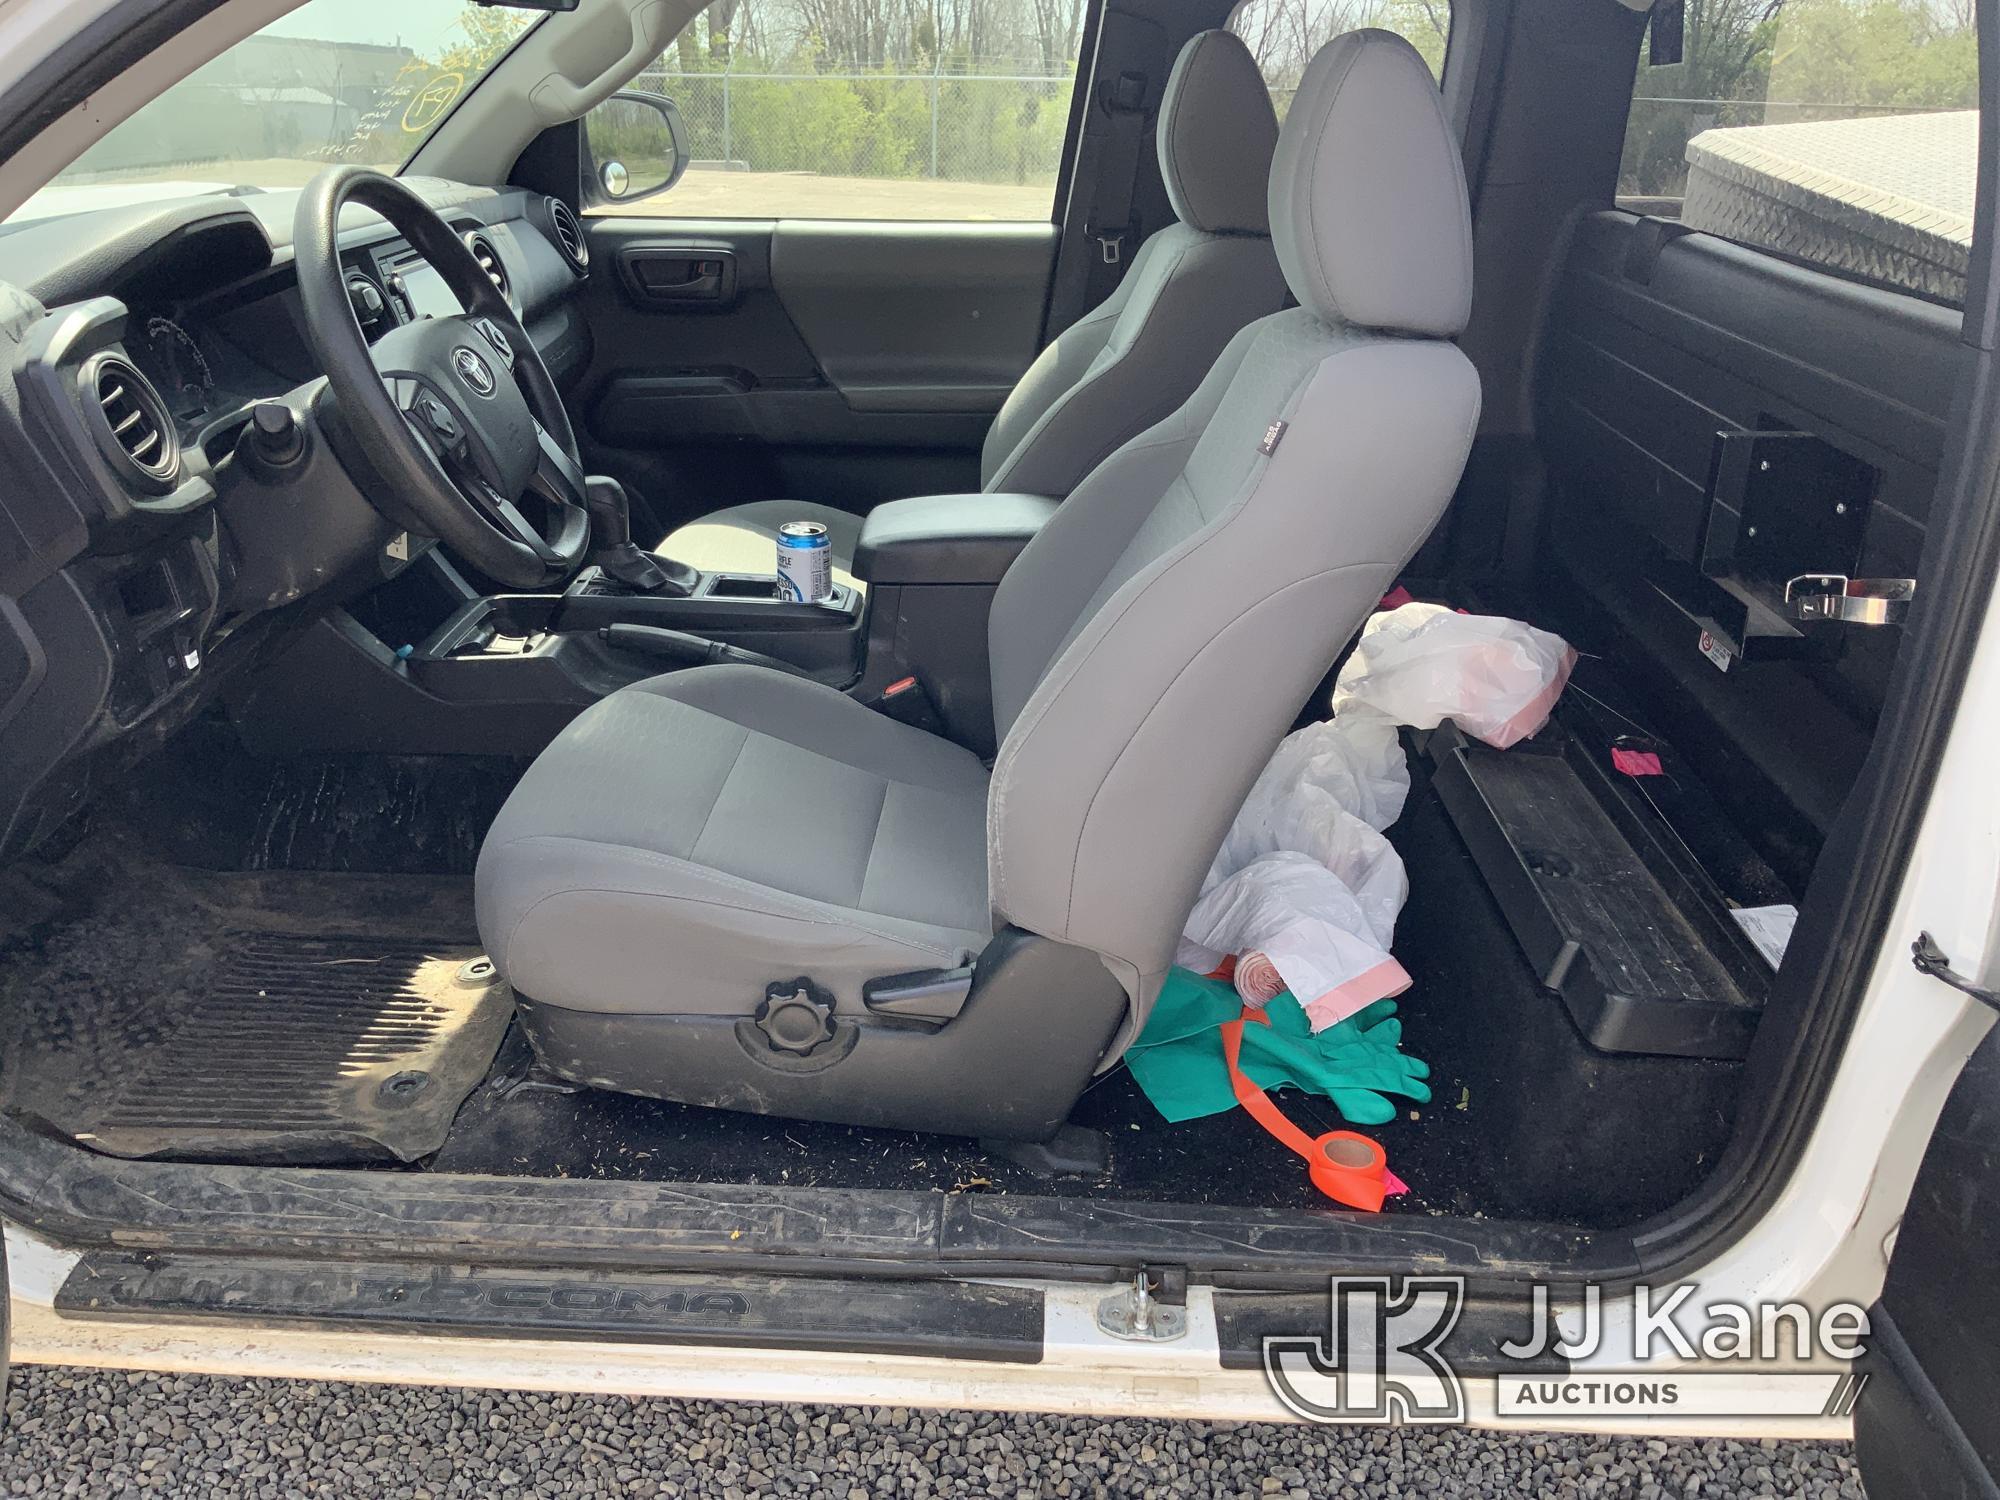 (Fort Wayne, IN) 2019 Toyota Tacoma 4x4 Extended-Cab Pickup Truck Runs & Moves) (Wrecked